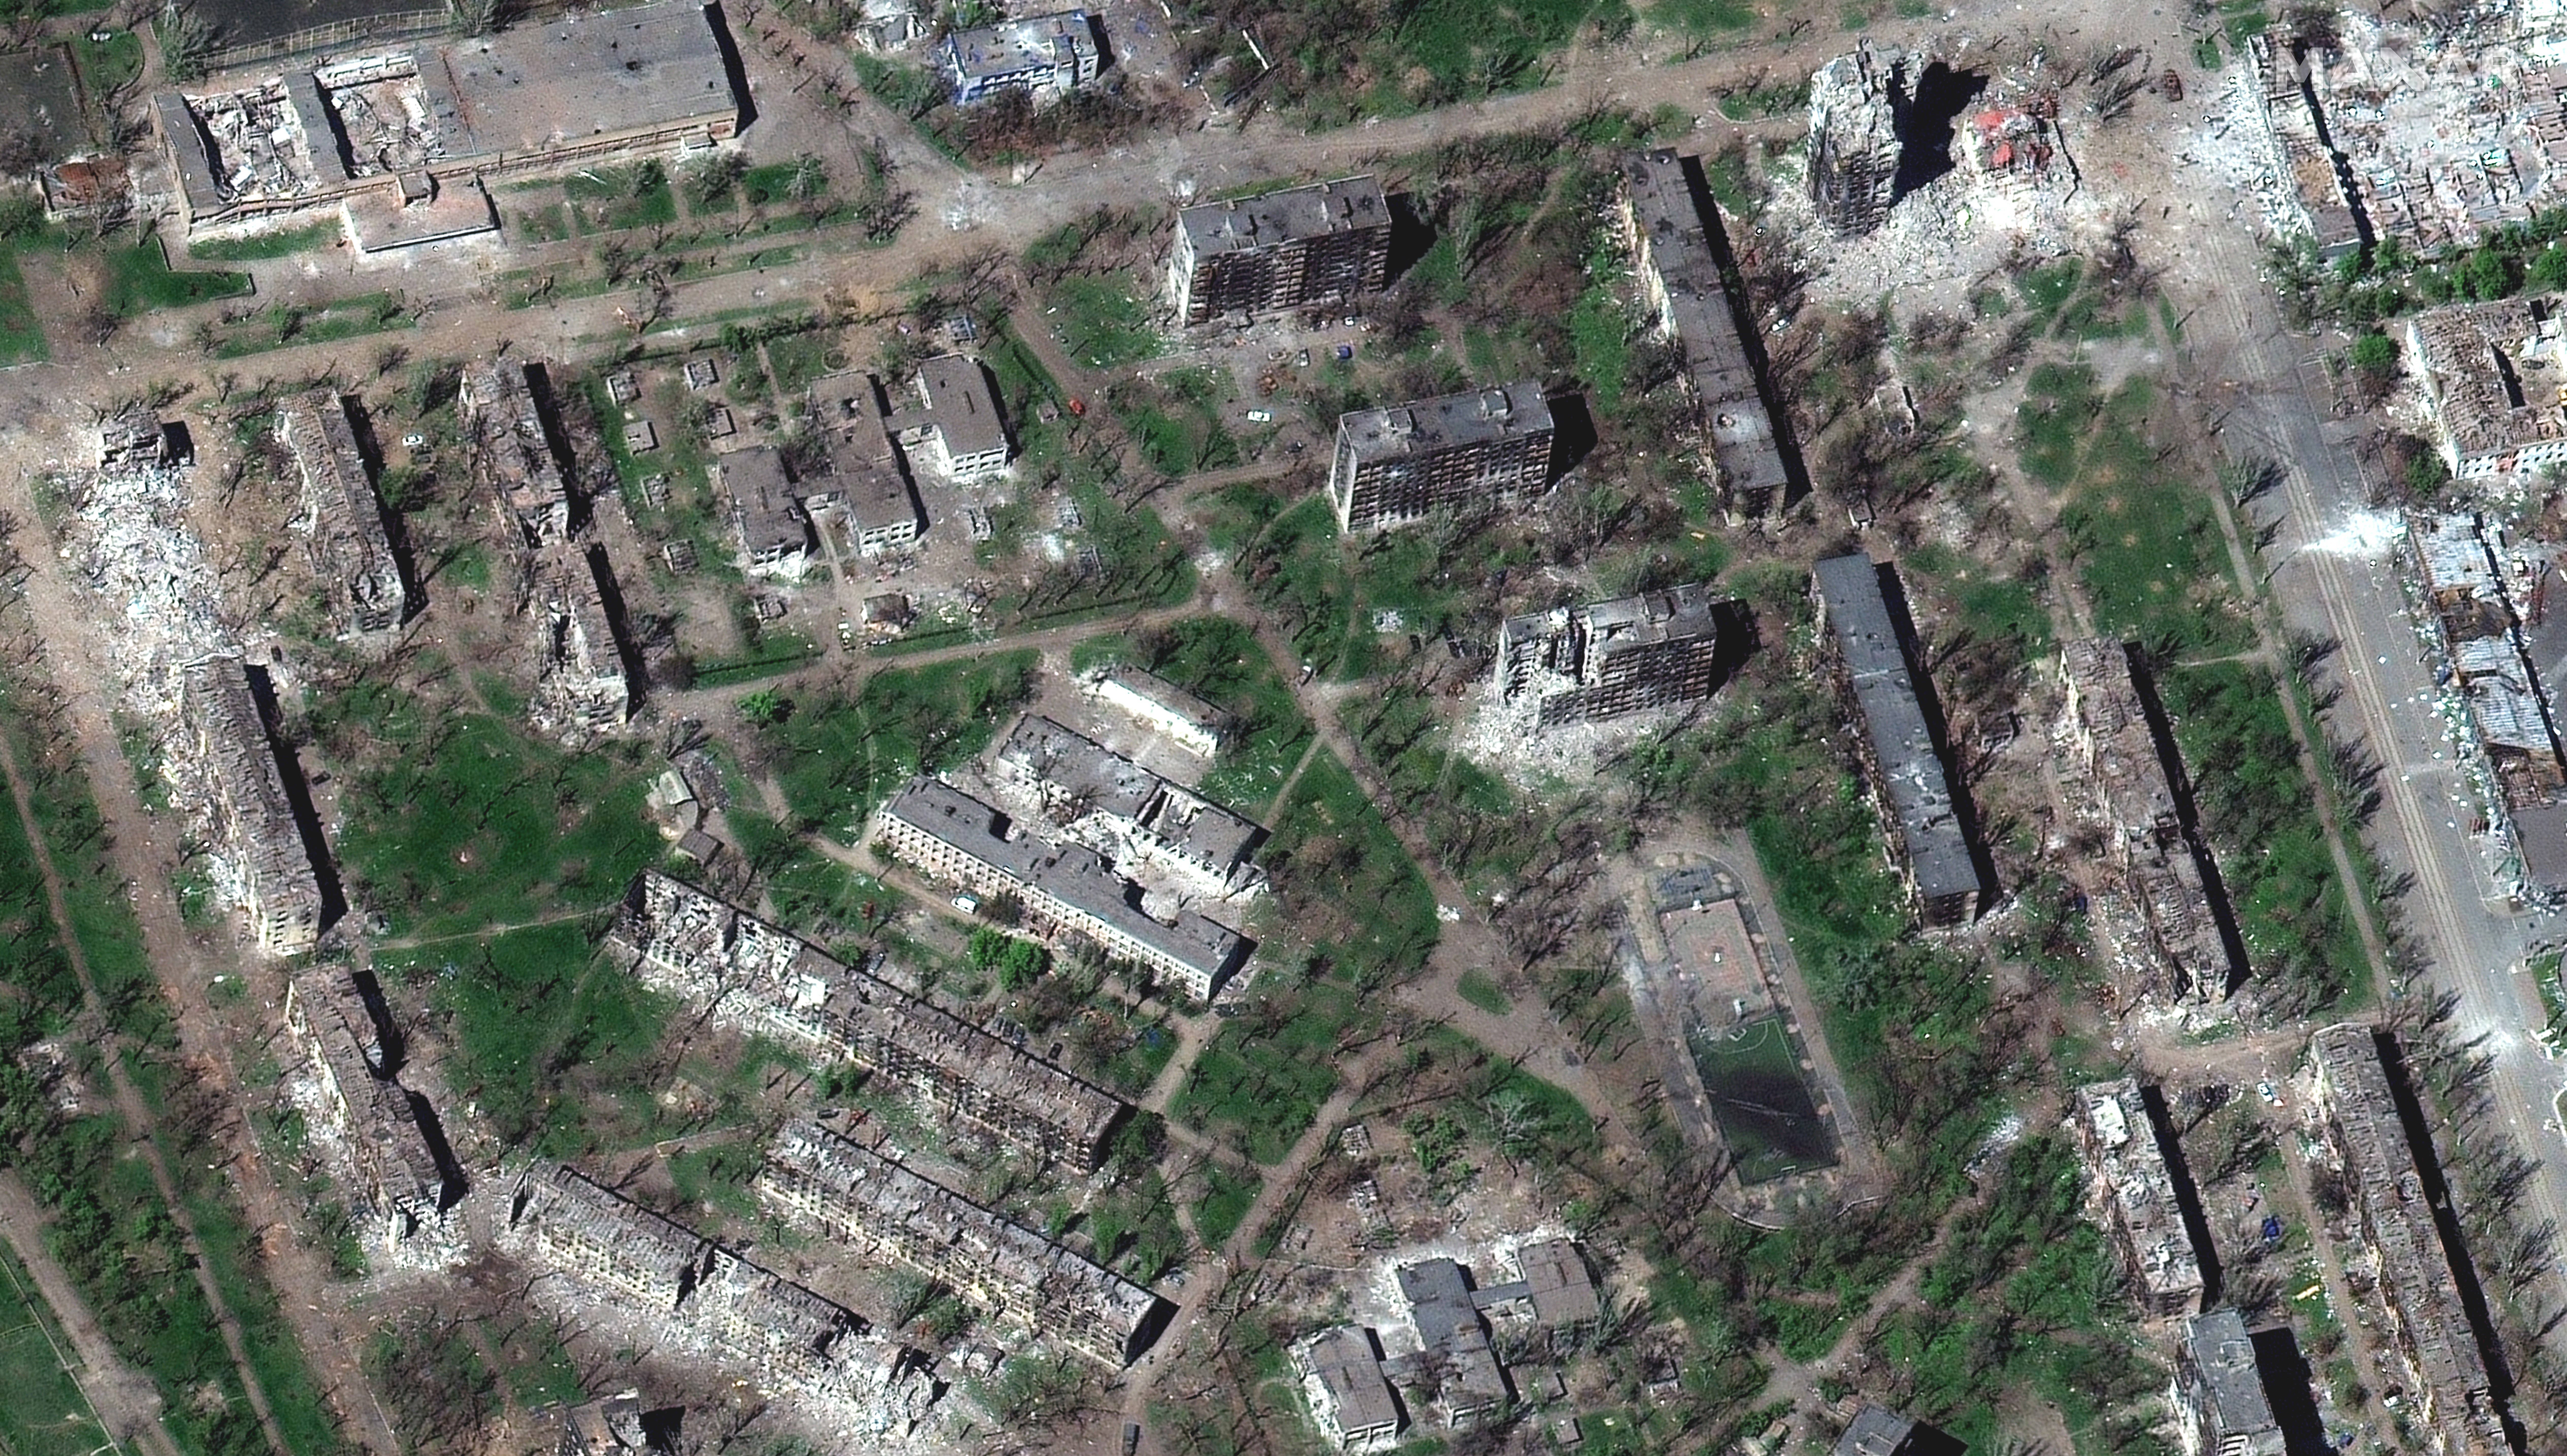 Mariupol-Apartment-Blocks-Burned-And-Destroyed-In-Russian-Siege.jpg